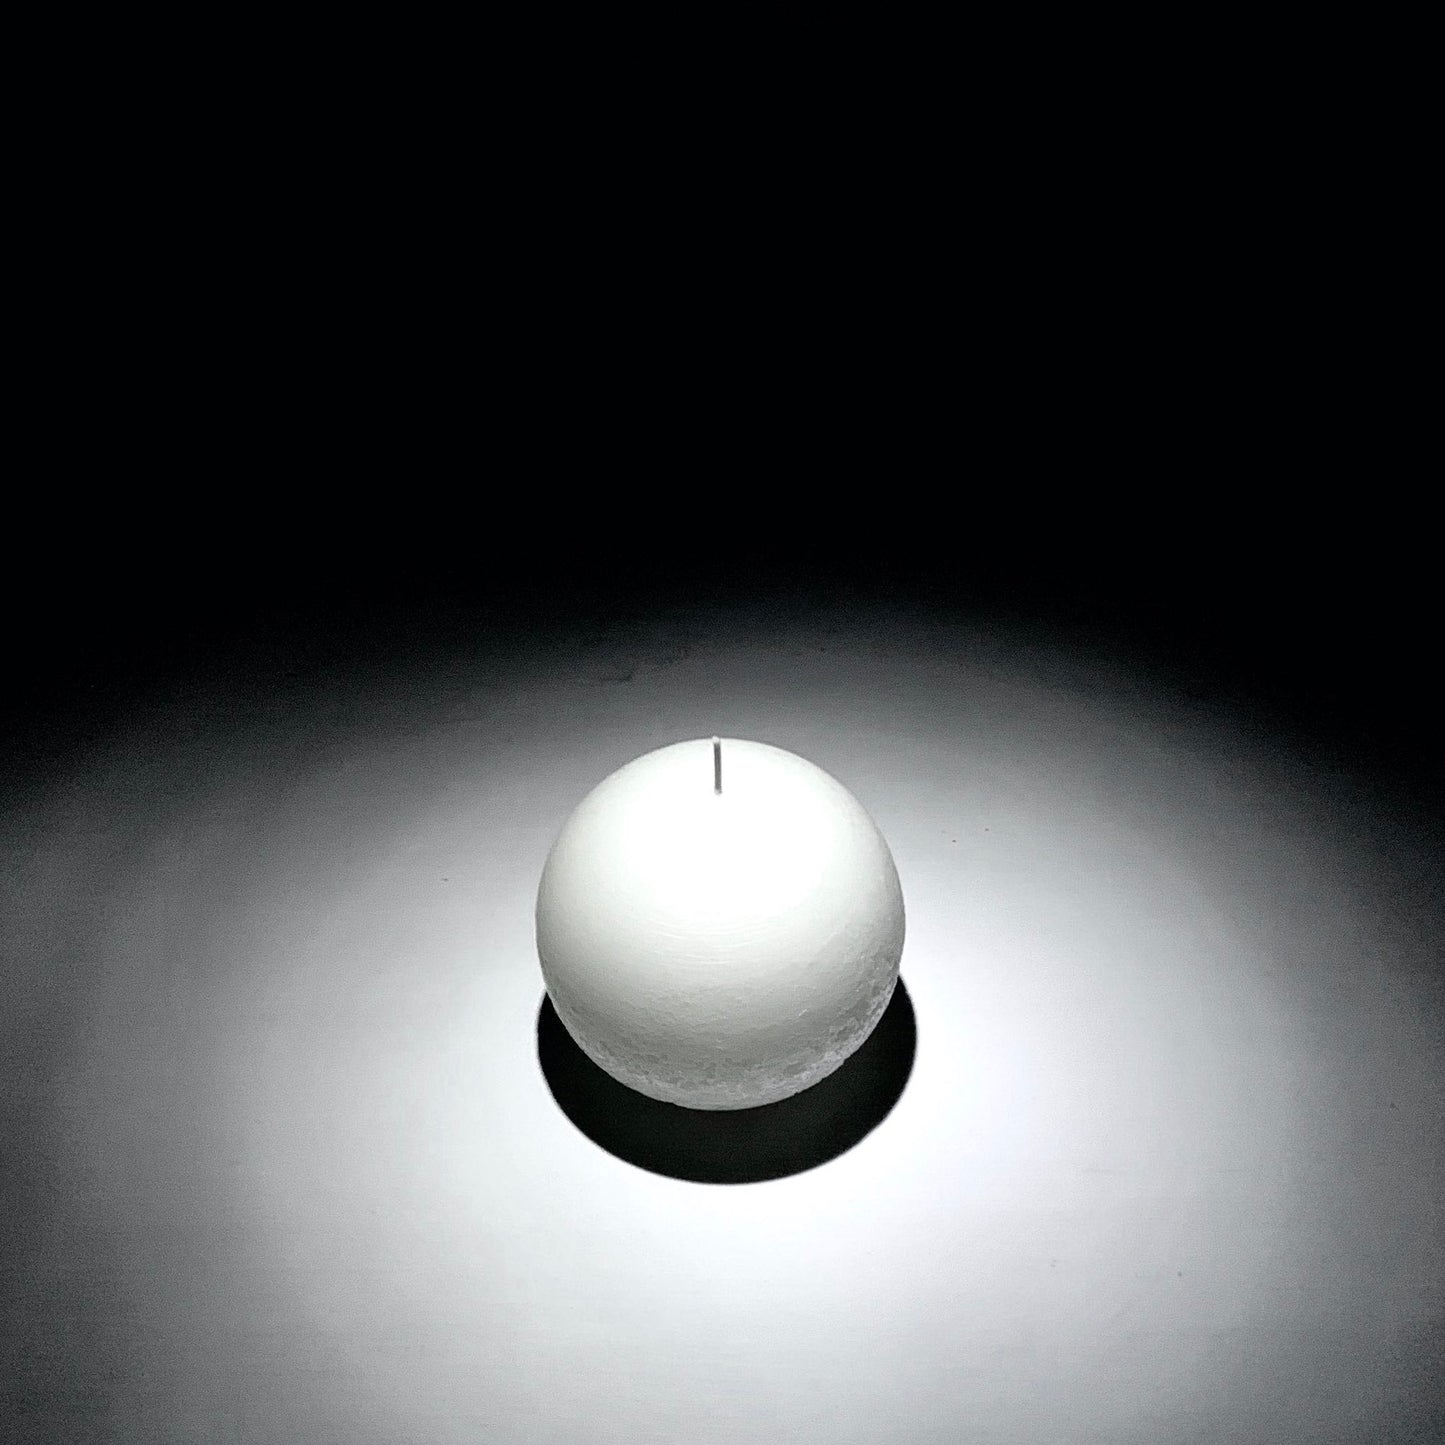 Round white sphere candle